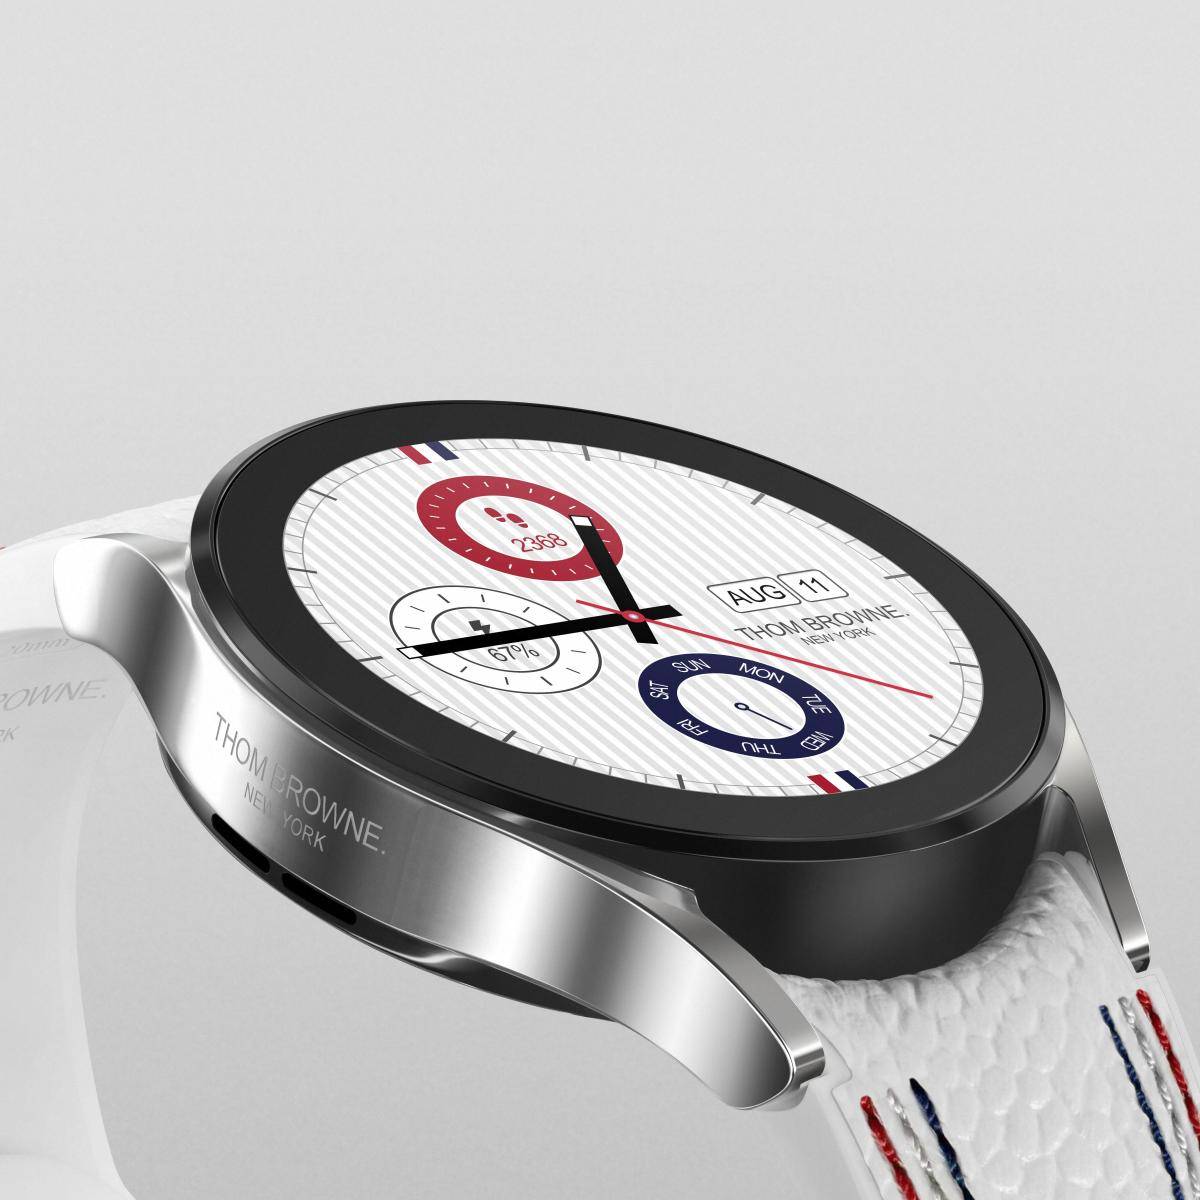 01_004_Thom Browne 3rd Edition_Watch4_Product_Detail_1x1_JPG_210726_H